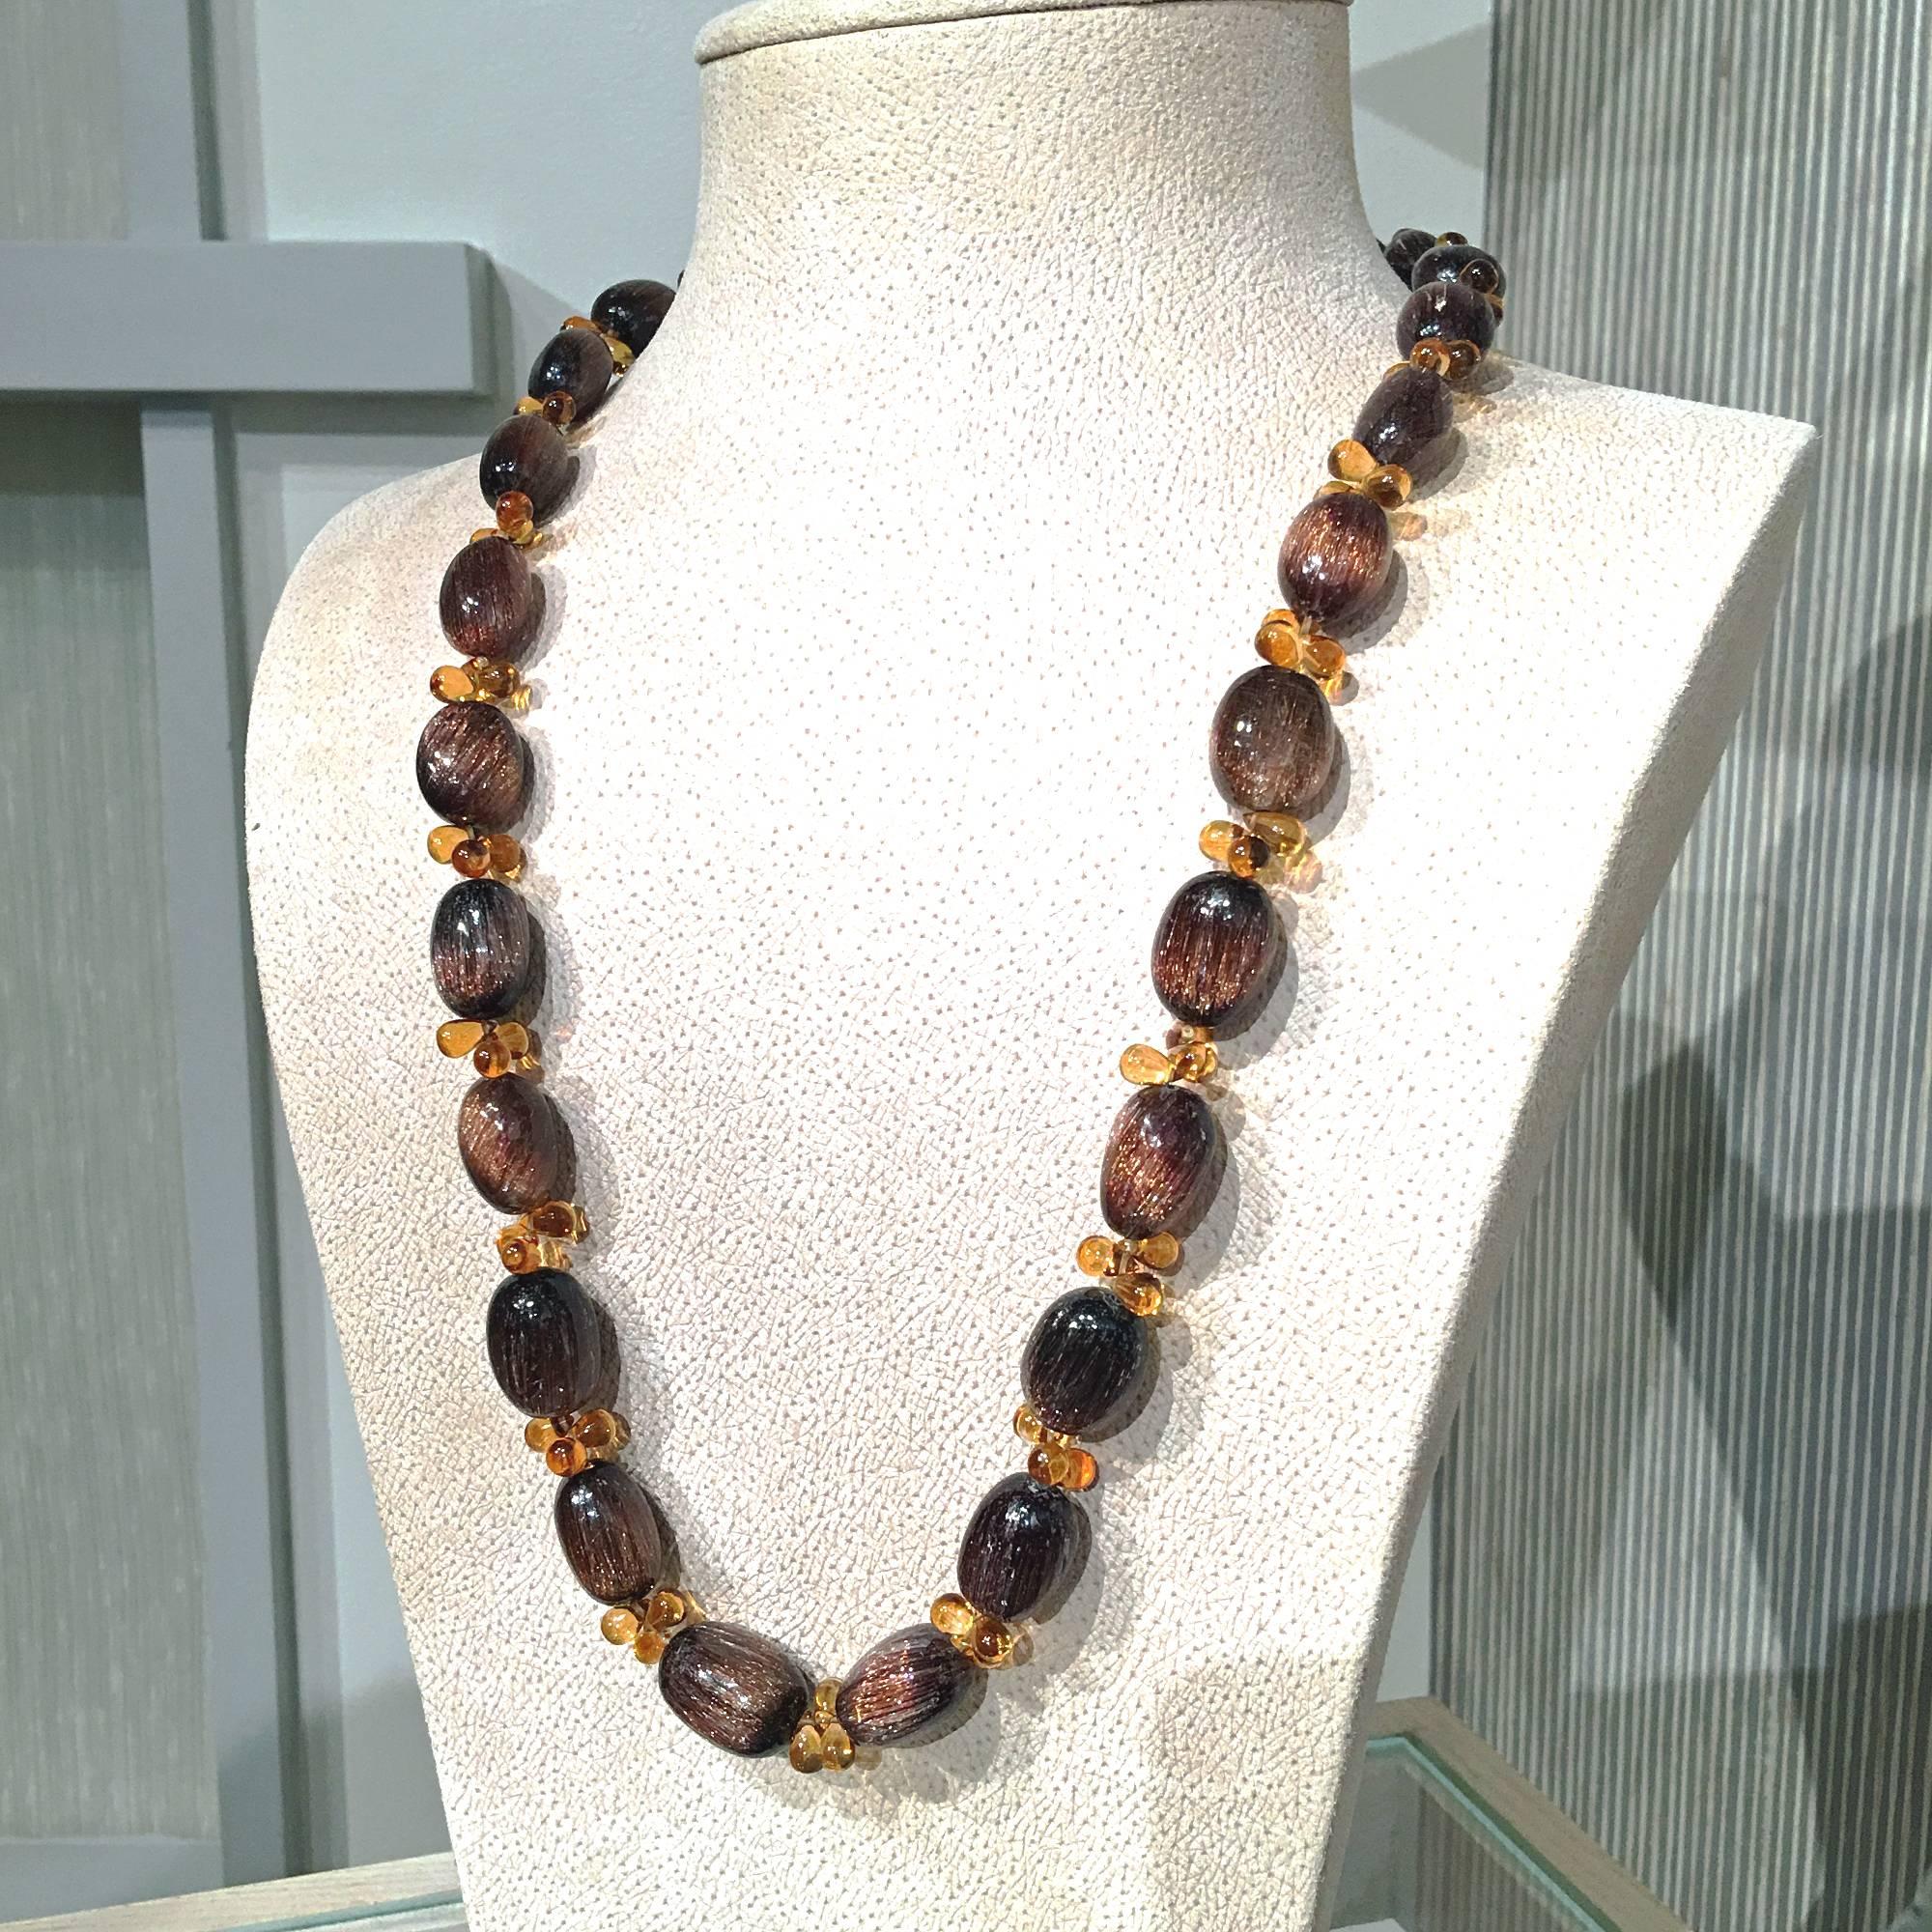 One of a Kind Necklace handcrafted by jewelry designer Joseph Murray featuring an array of rutilated quartz oval beads with a vibrant sheen and separated by triple clusters of smooth citrine briolettes on an 18k yellow gold toggle clasp. Stamped and